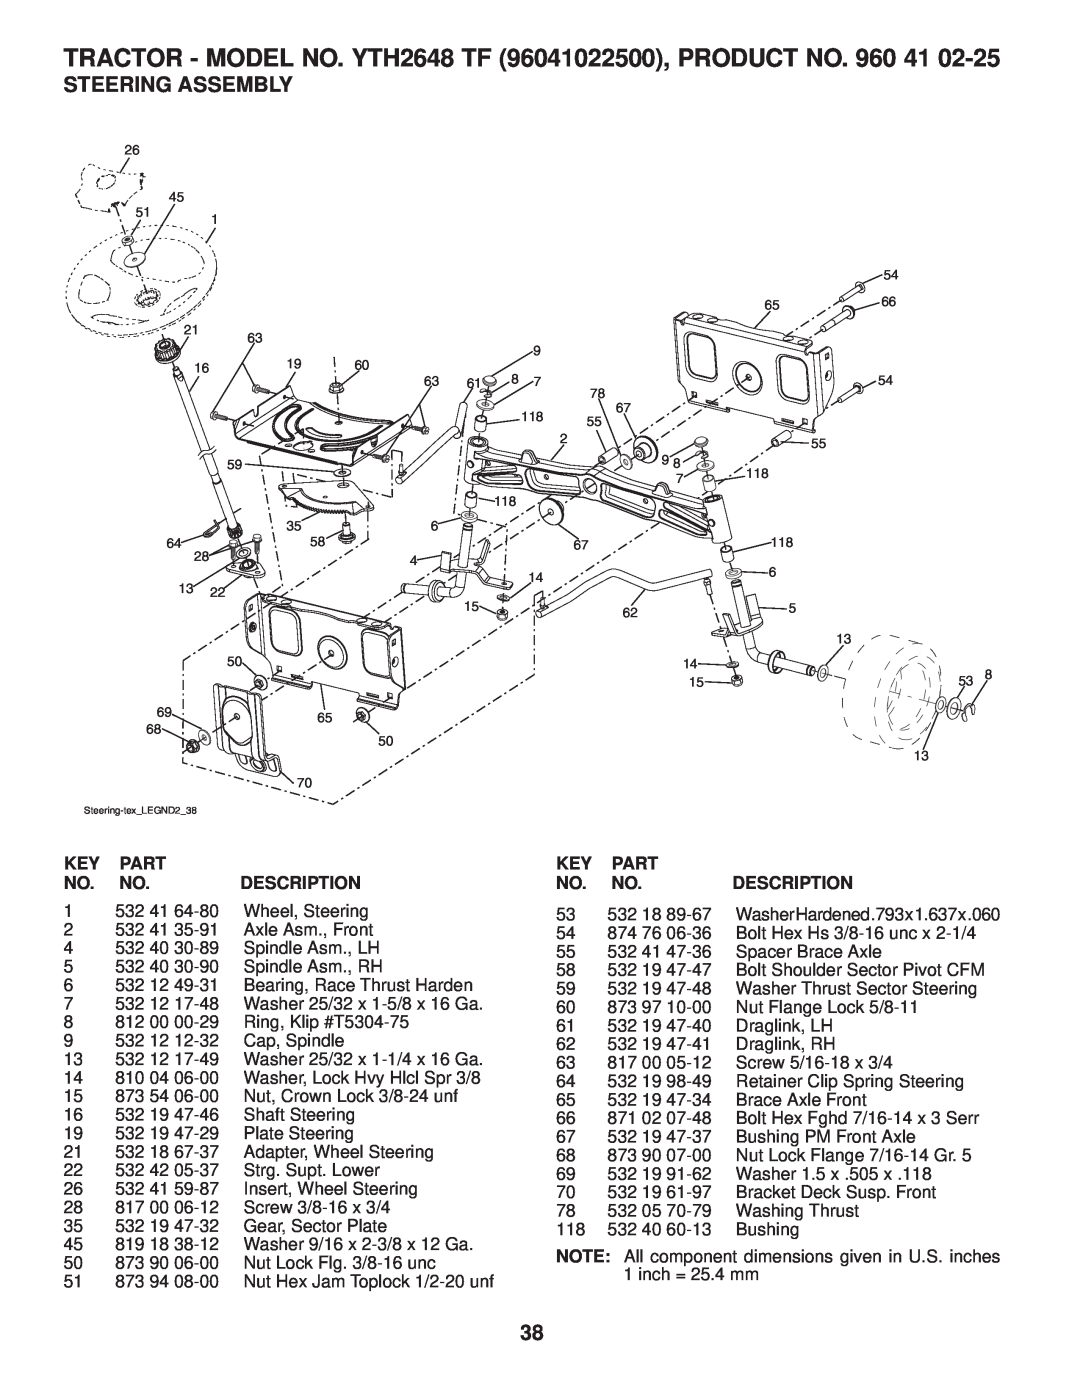 Husqvarna owner manual Steering Assembly, TRACTOR - MODEL NO. YTH2648 TF 96041022500, PRODUCT NO, Part, Description 